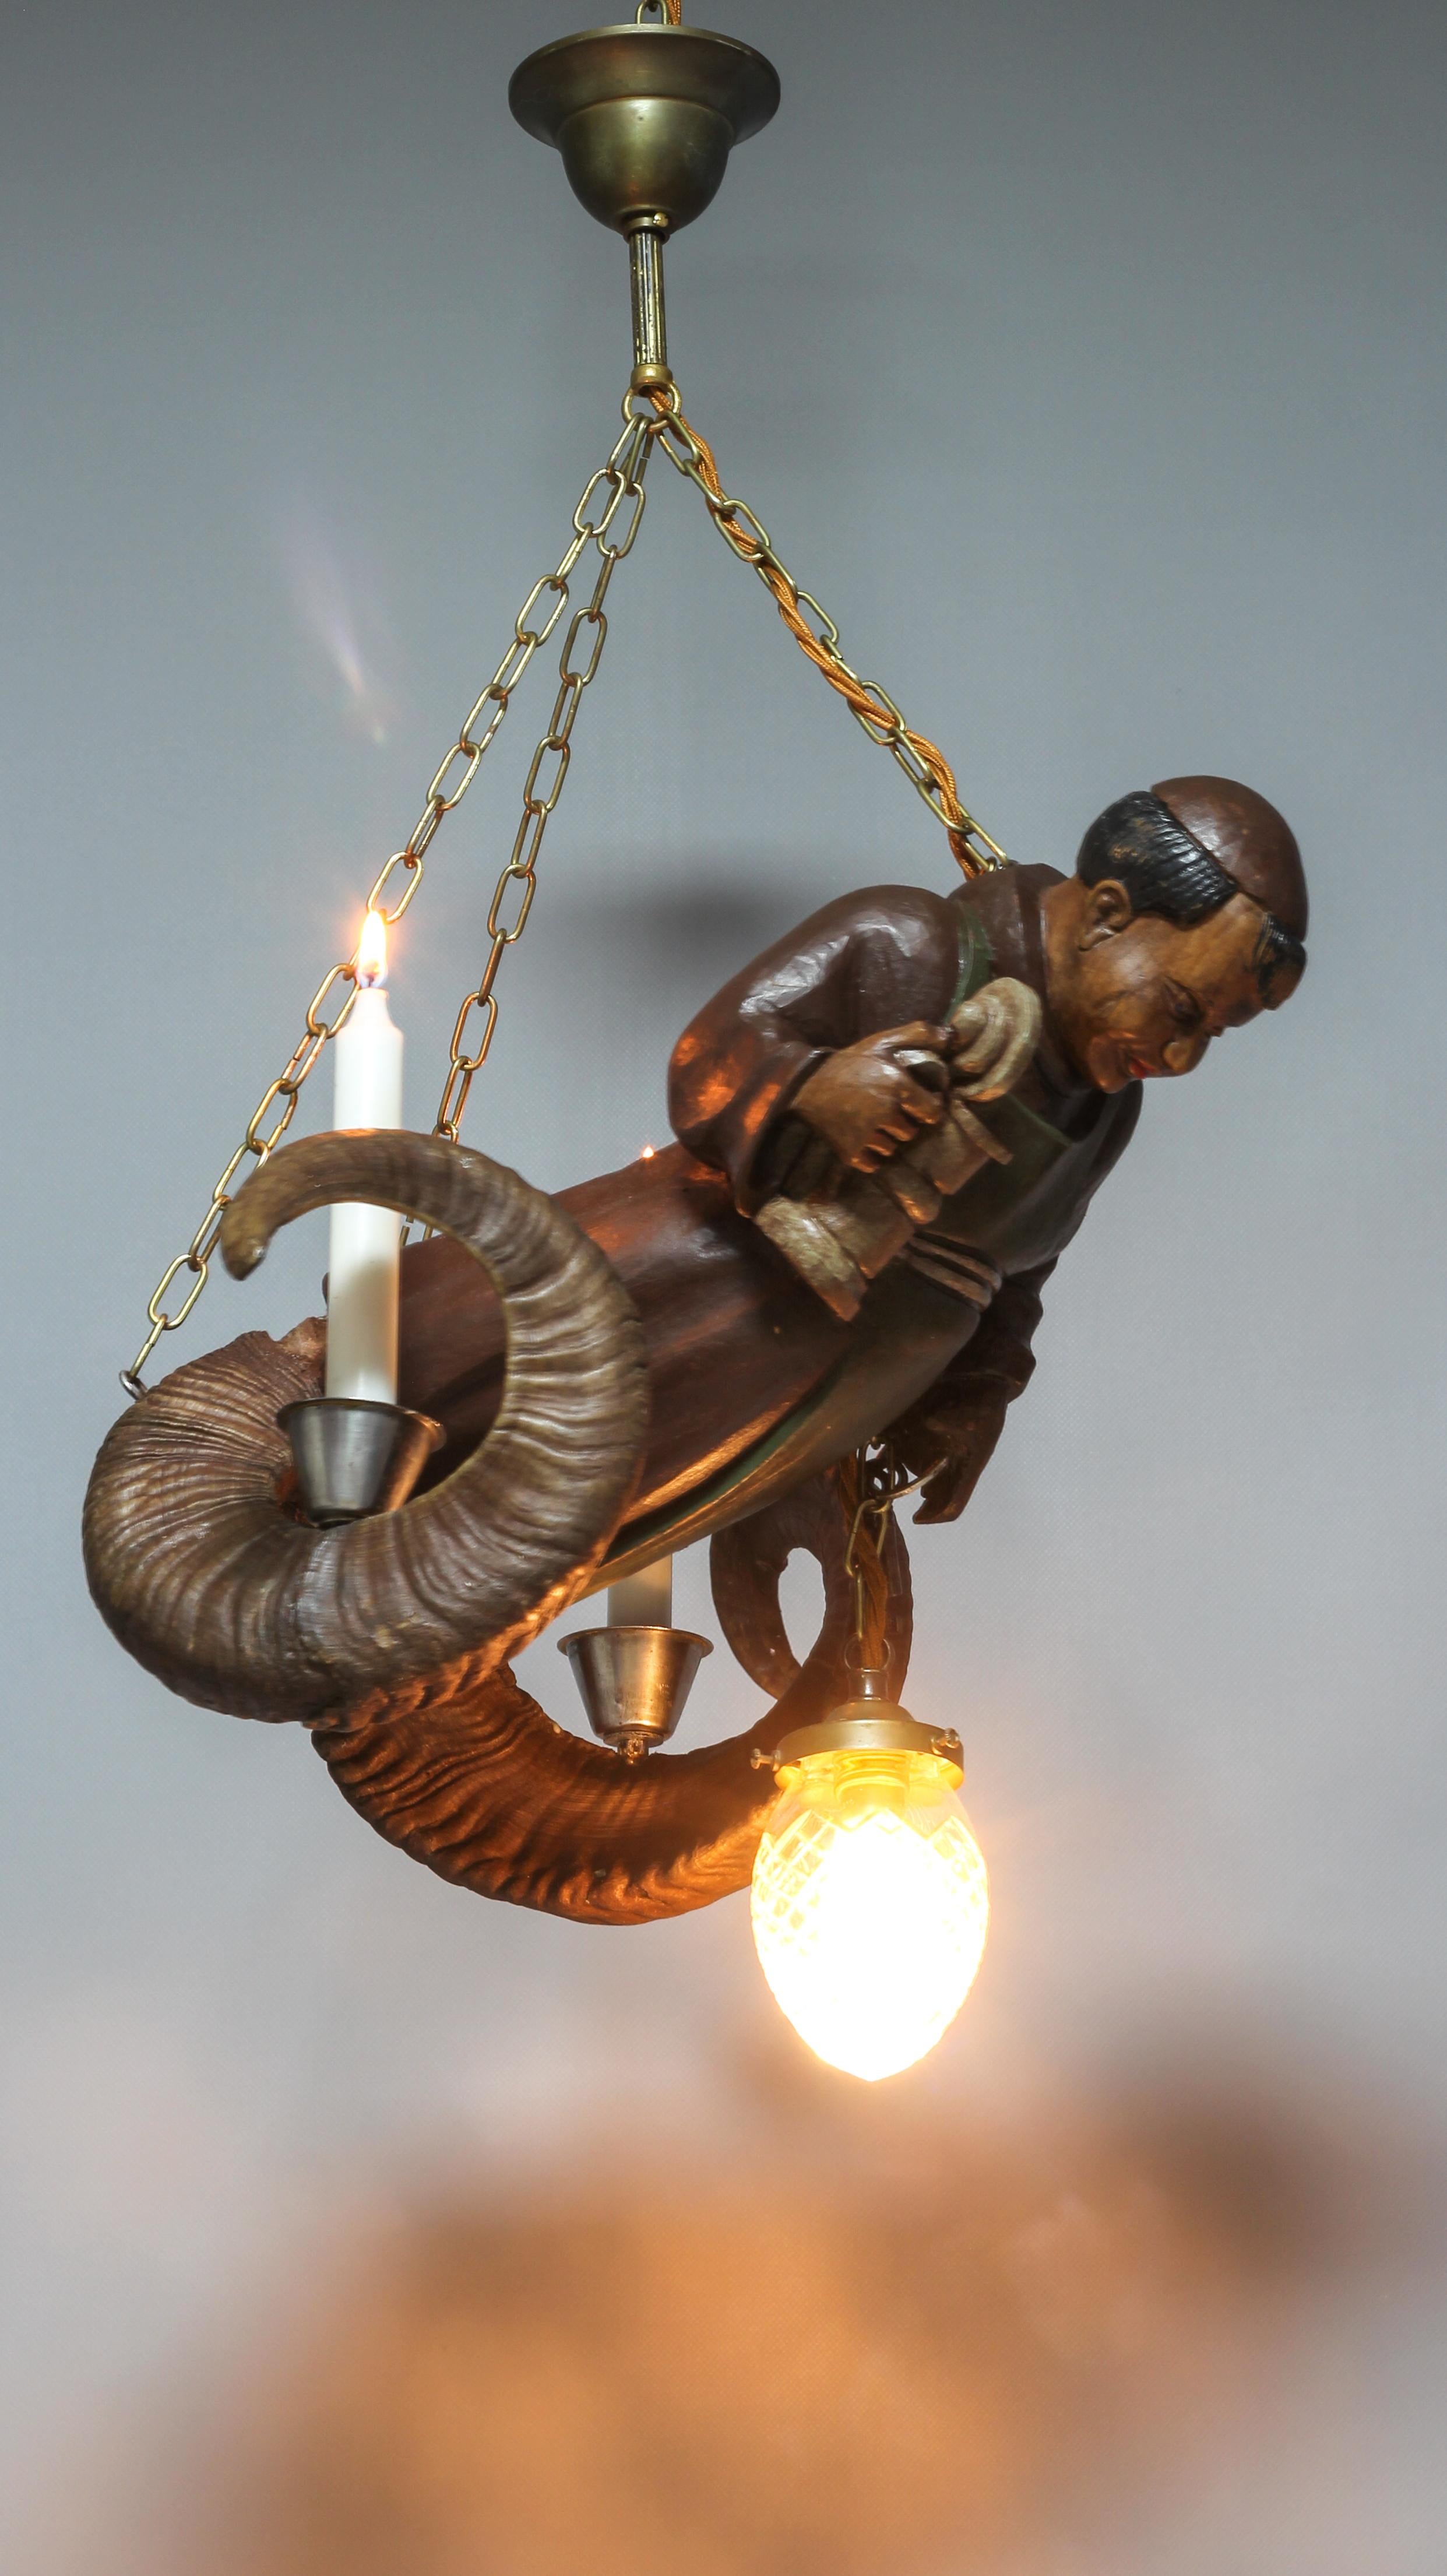 Hand-Carved Wooden Pendant Light Lustermandl with Cellar Master Figure, ca. 1920 1